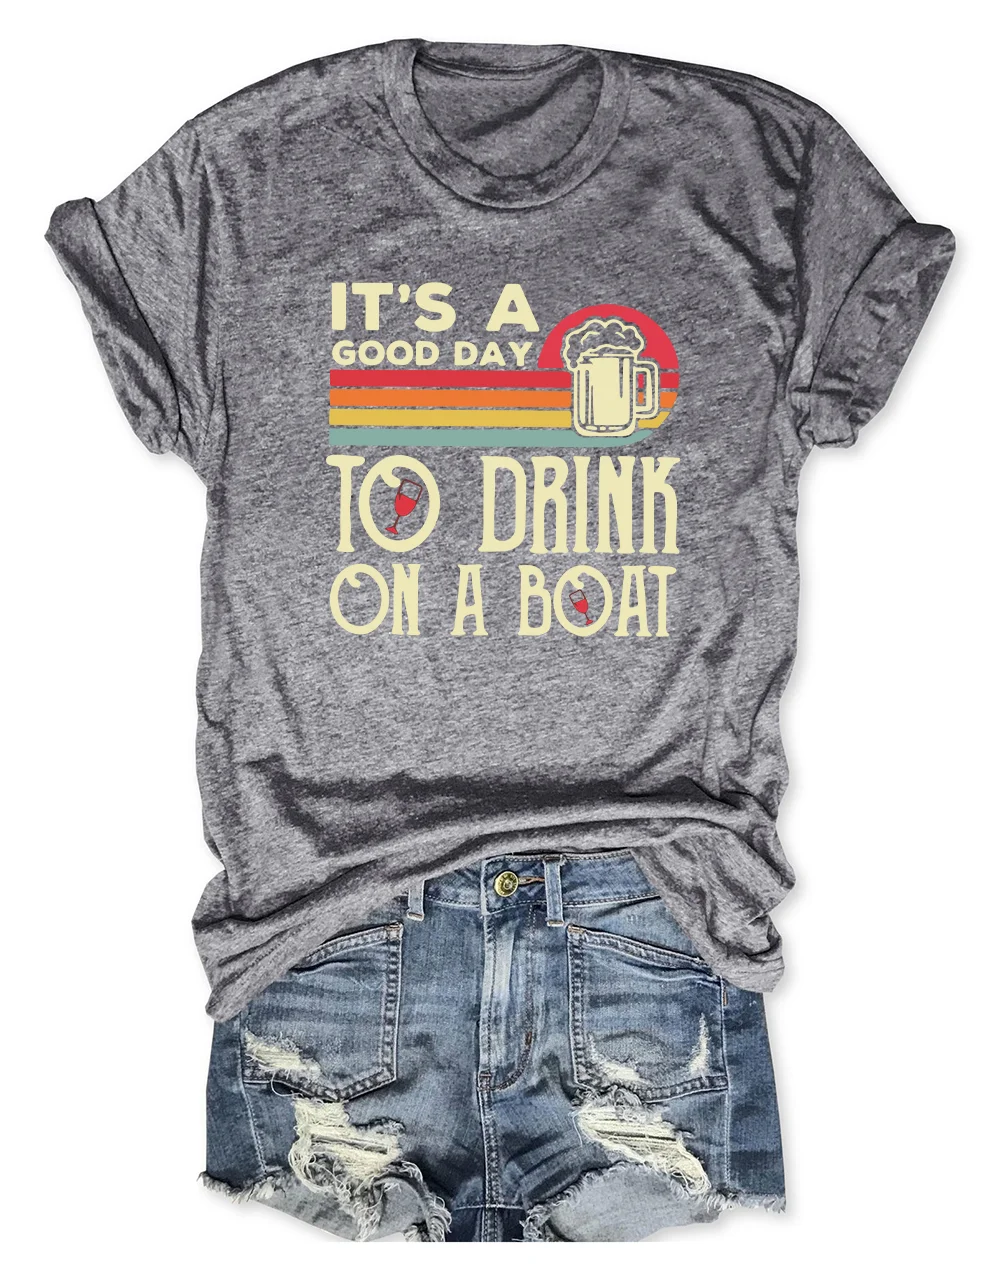 It's A Good Day To Drink On A Boat T-Shirt